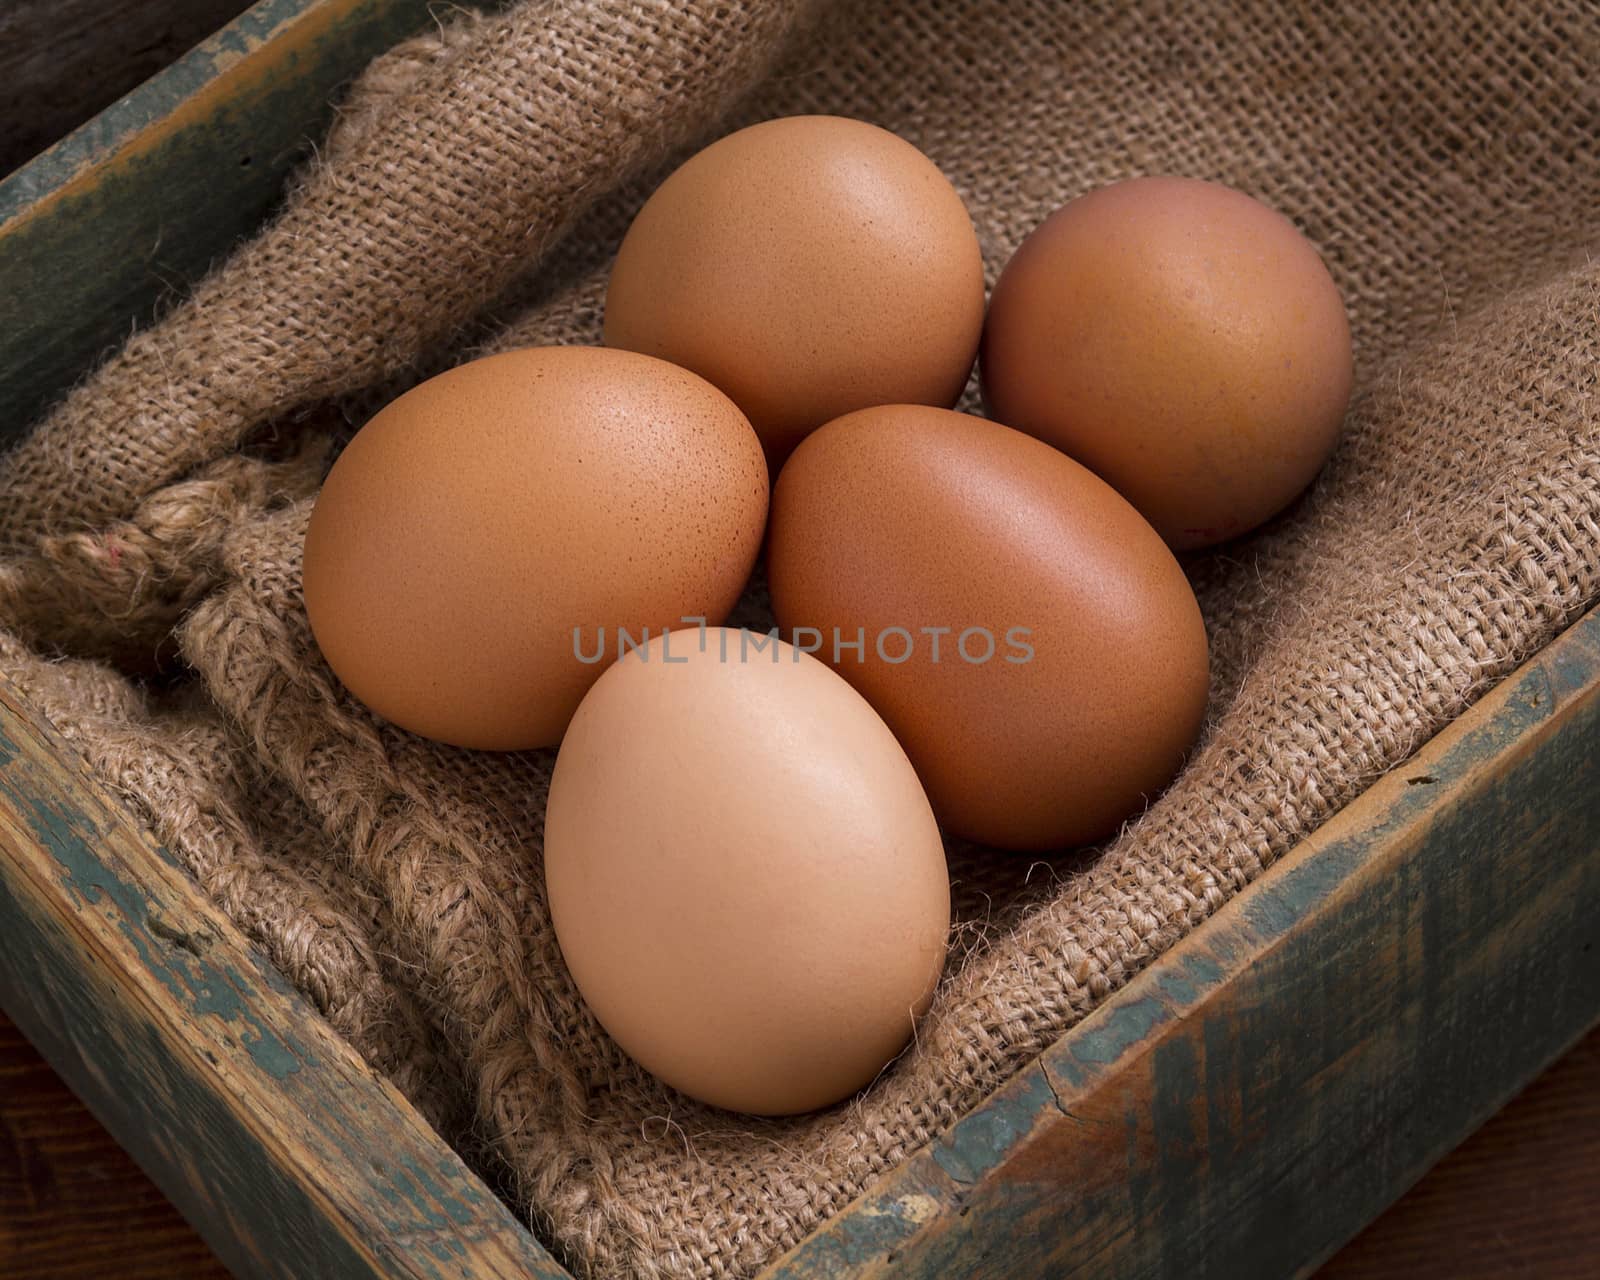 An old wooden box with some eggs on a sackcloth